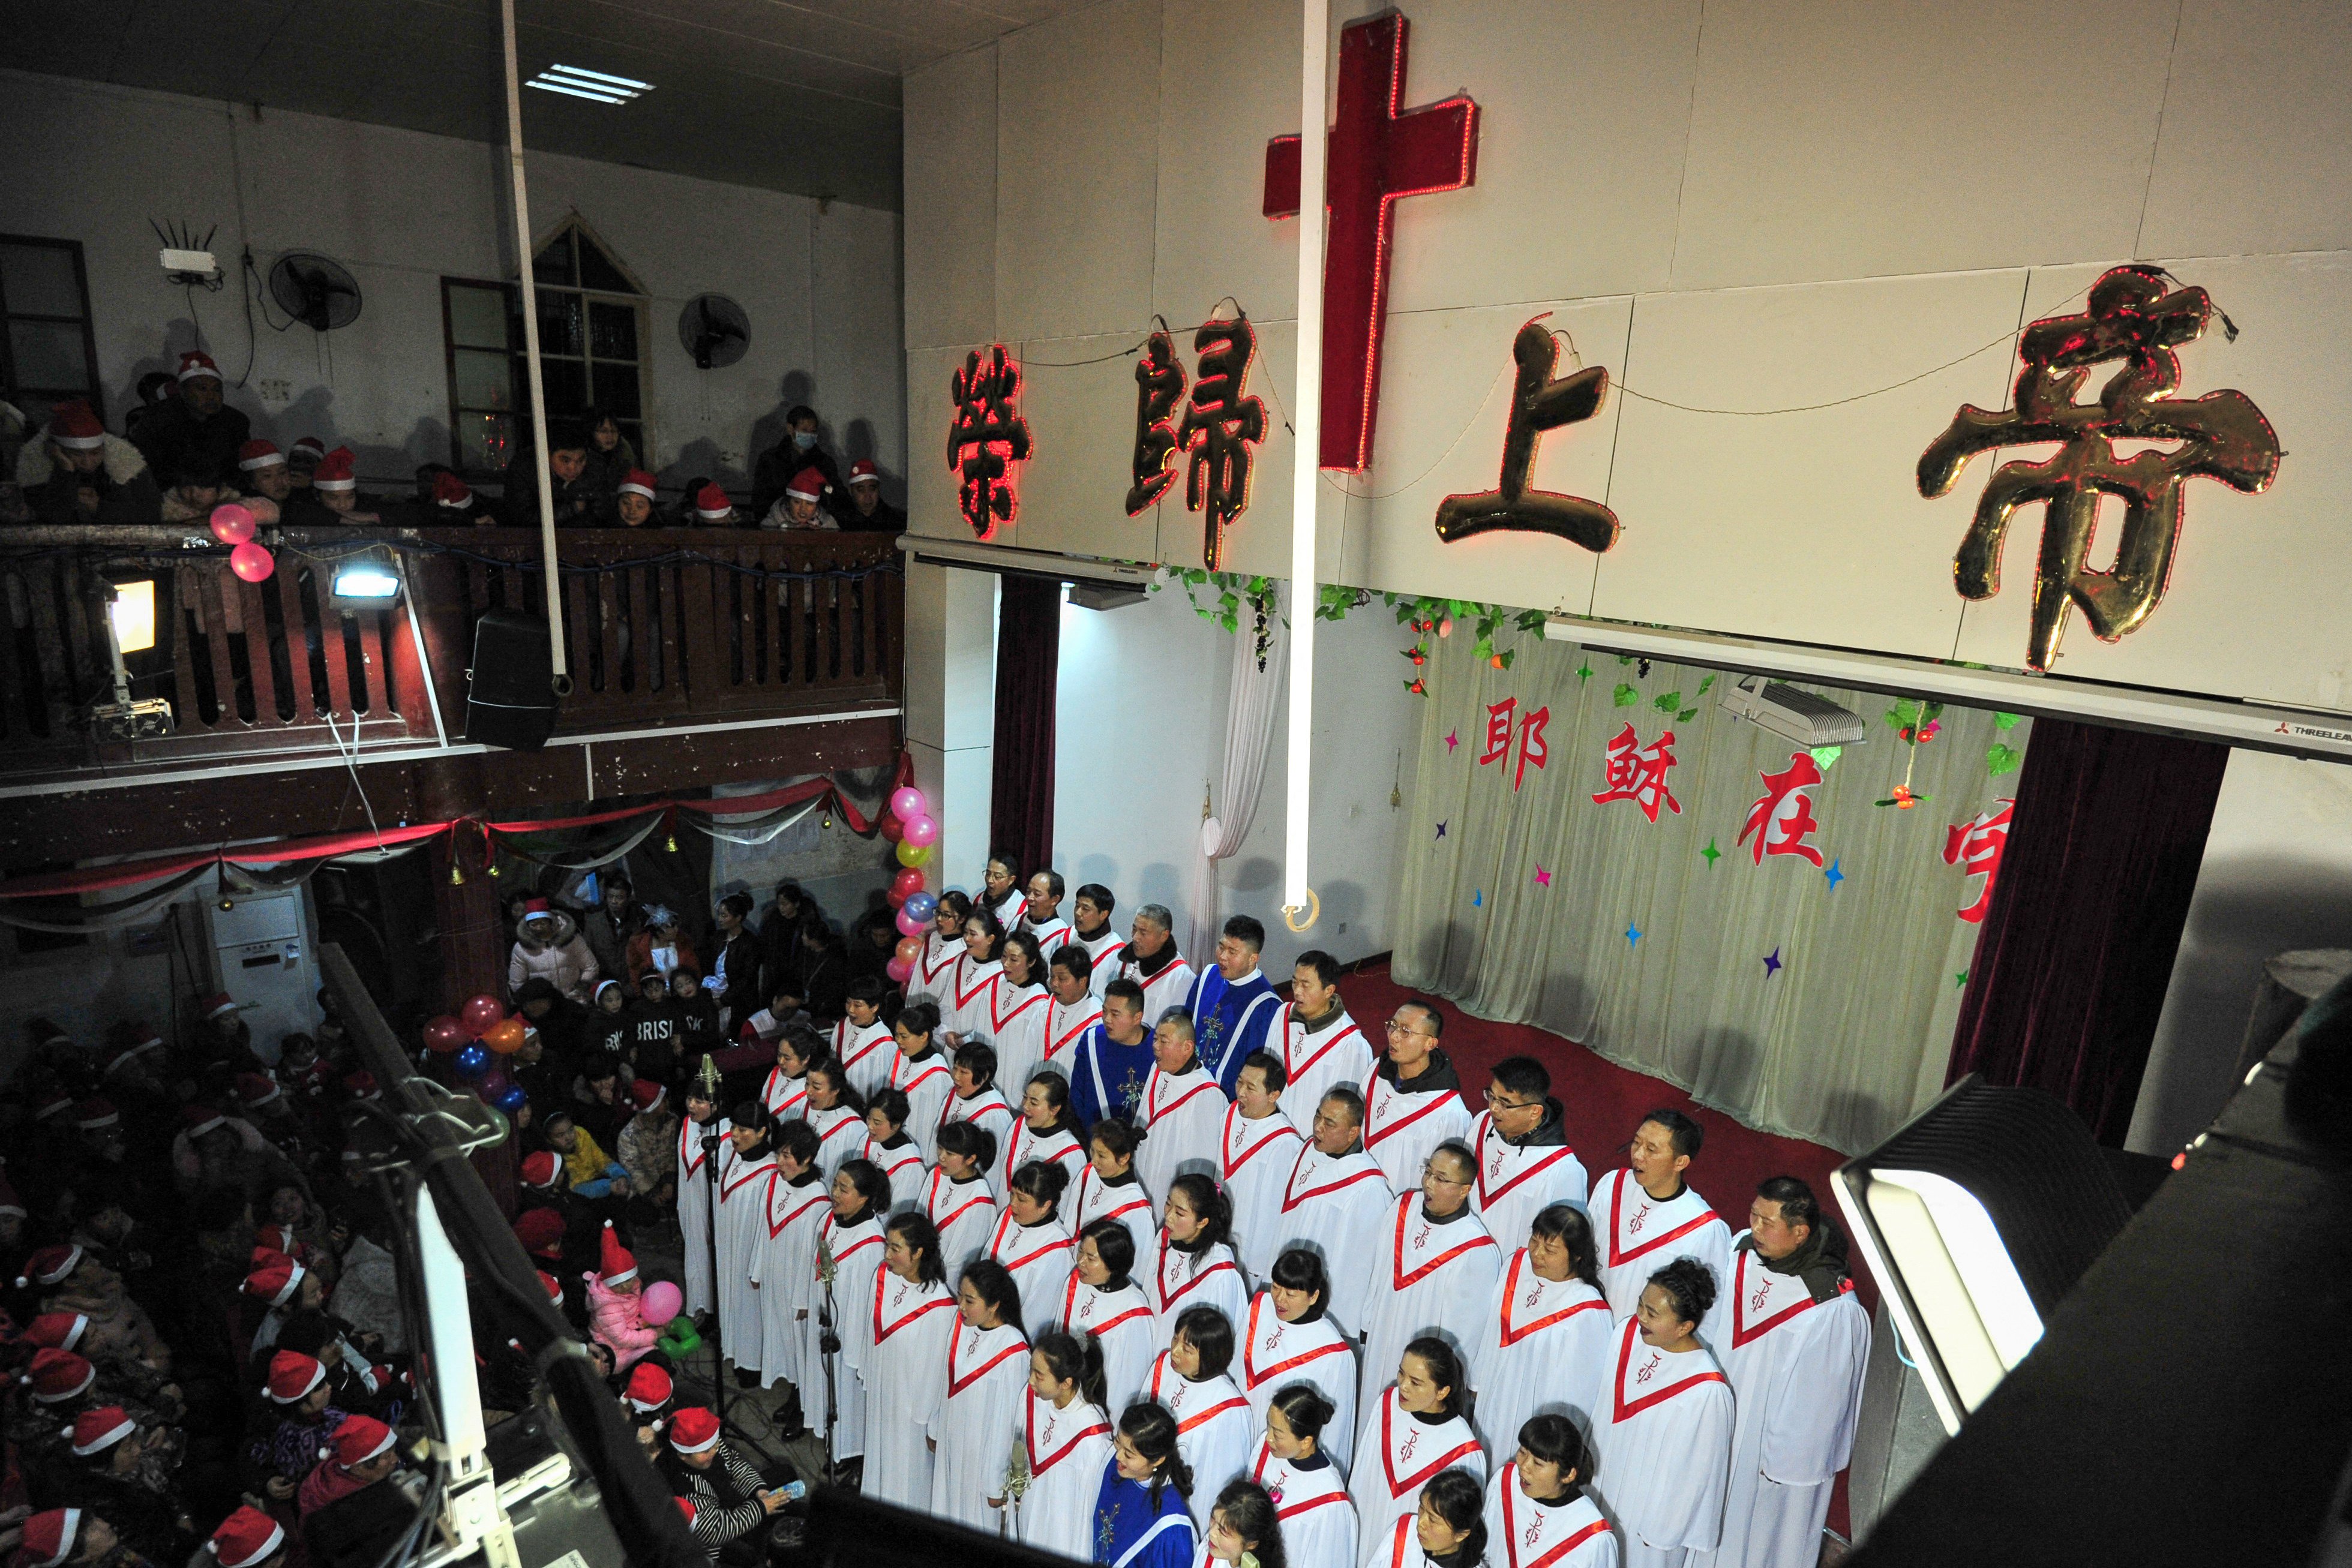 Roughly 90 per cent of Christians in China are Protestant, according to  a Pew Research Centre analysis of survey data collected by academic organisations in China. Photo: AFP